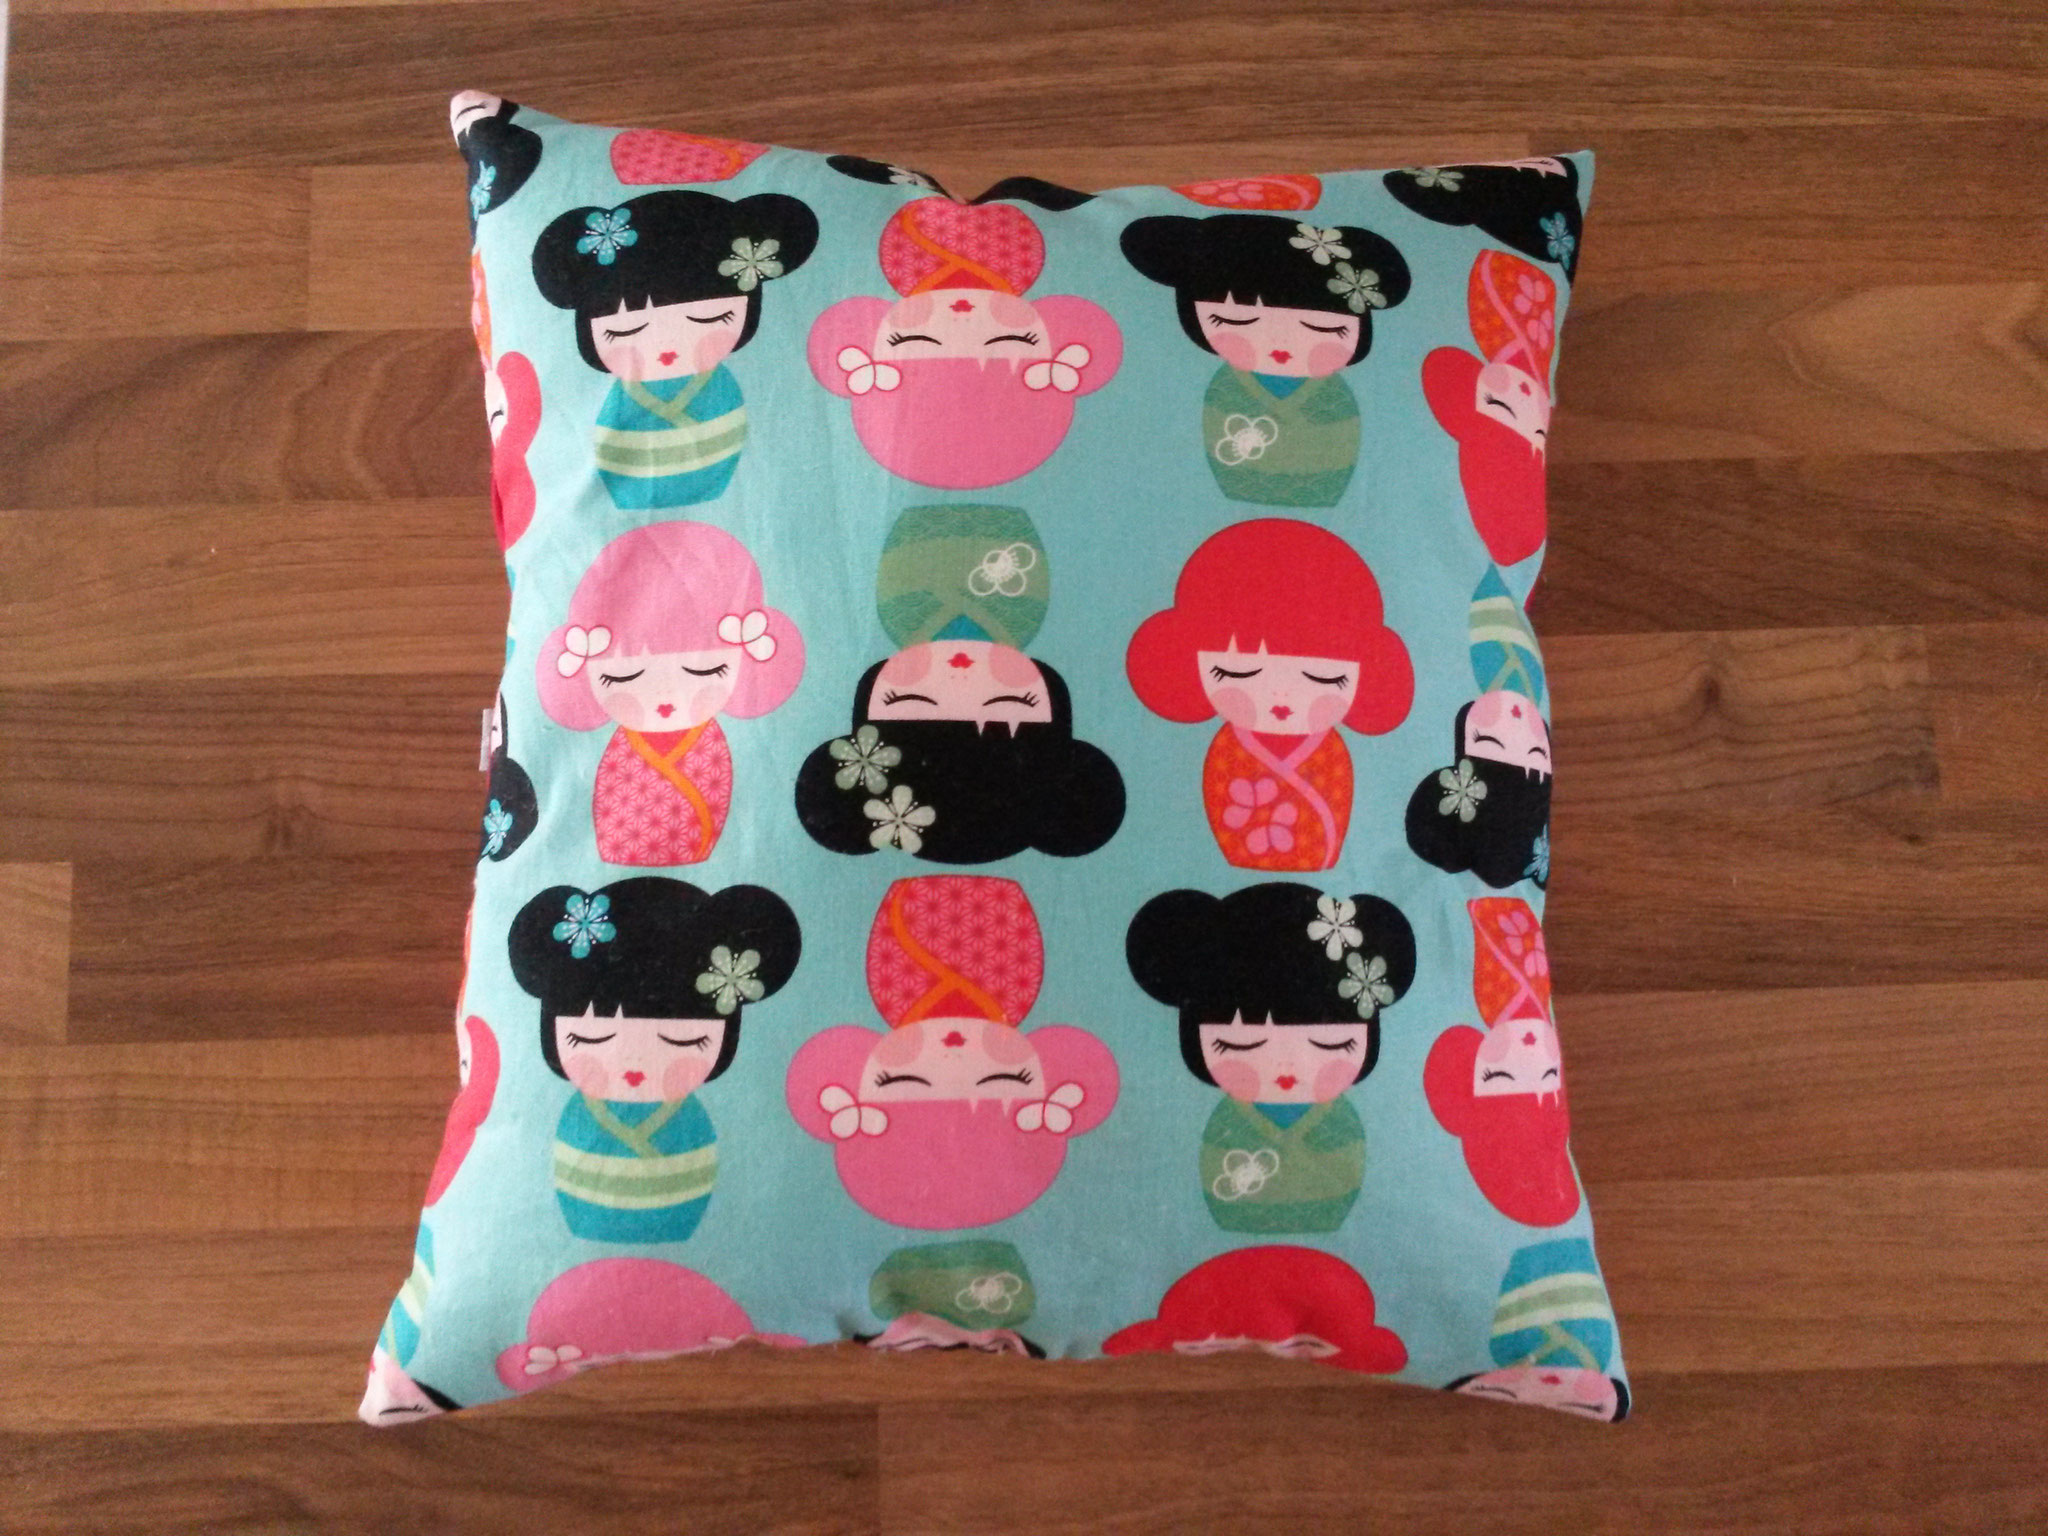 Coussin "Bisous" verso